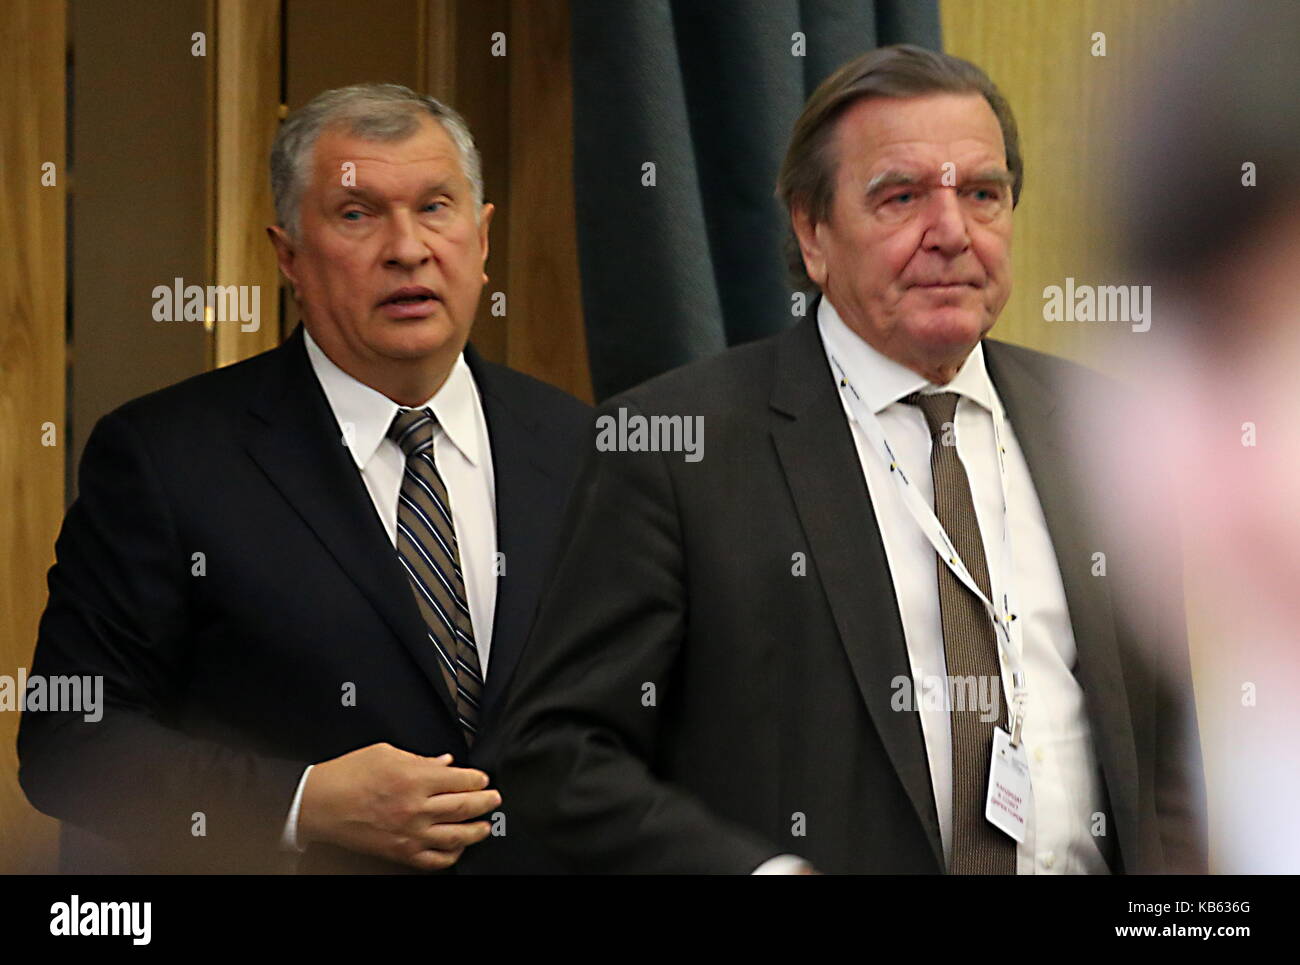 Image result for Gerhard Schroeder and Igor Sechin and Rosneft